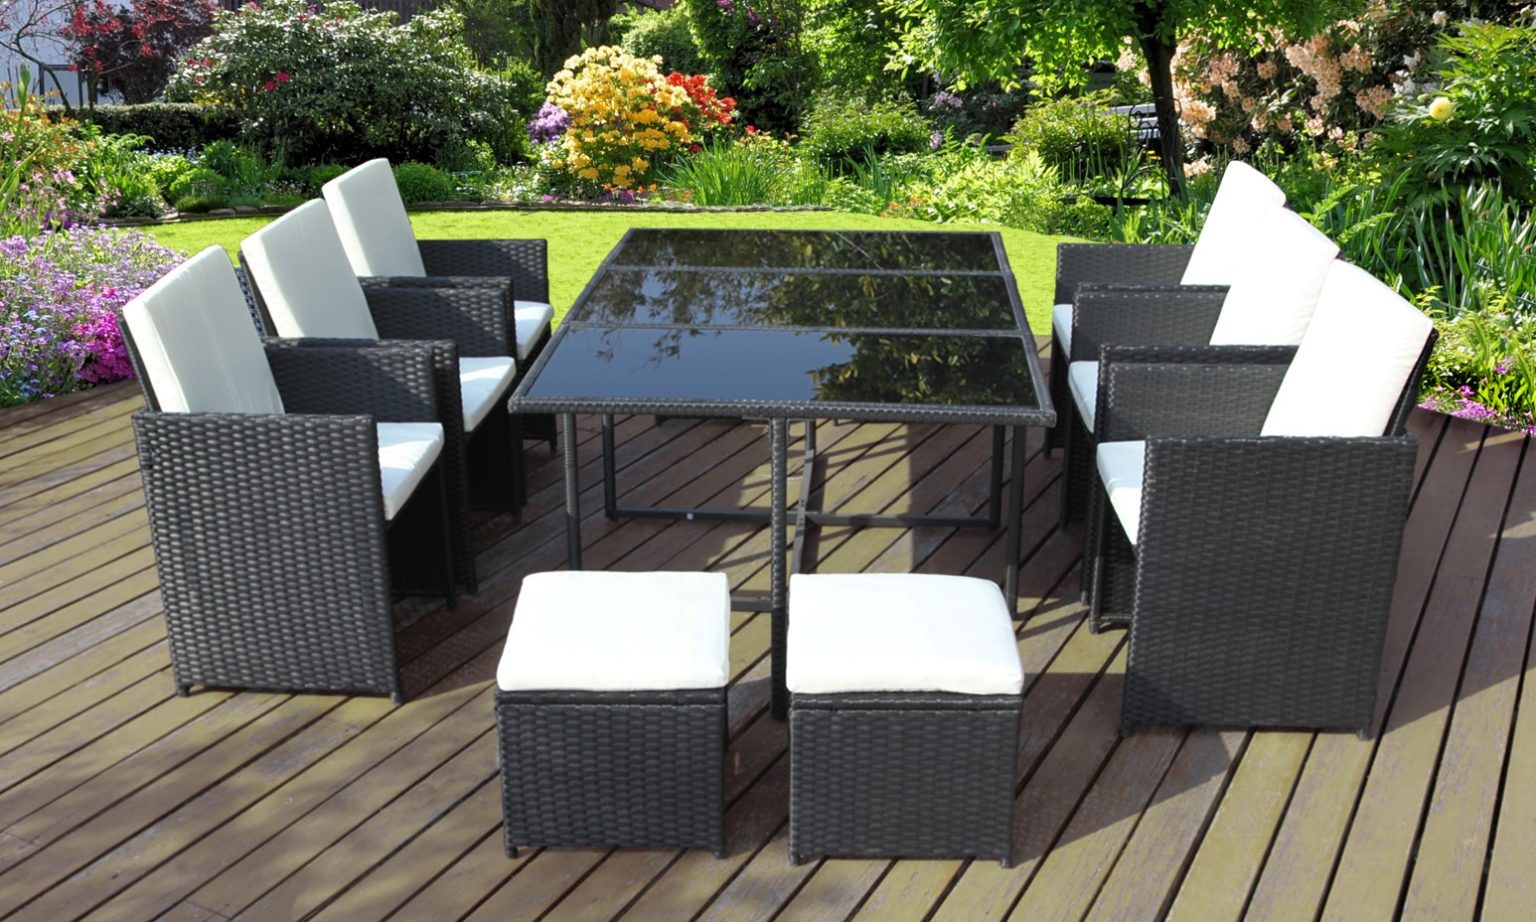 11 Piece Rattan Garden Furniture Sets Includes Table, Chairs & Cushions